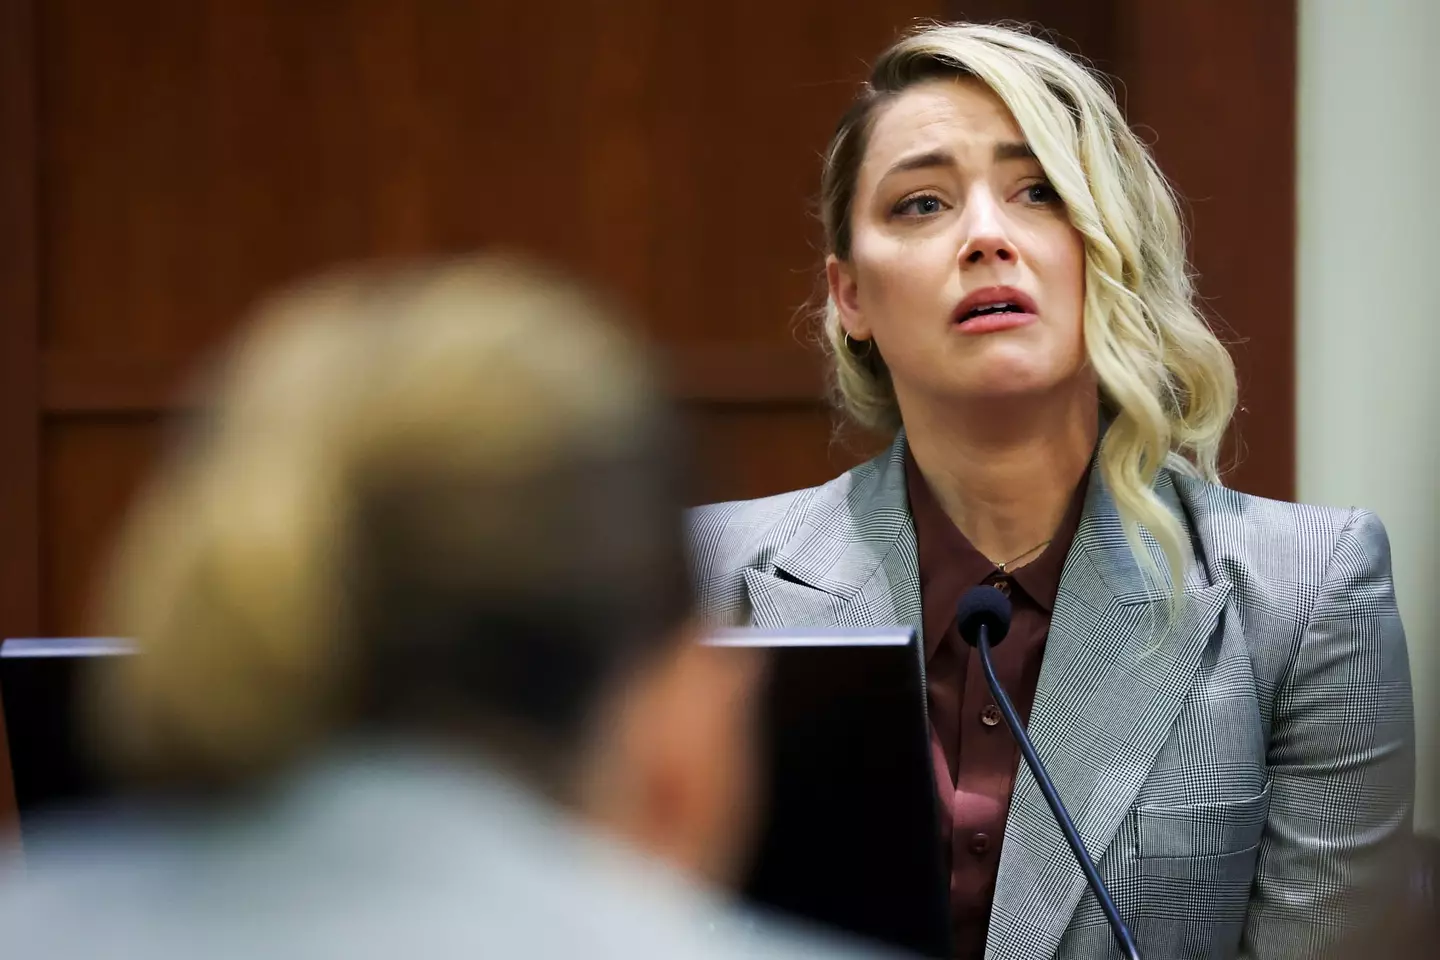 Amber Heard has appealed the verdict of her defamation trial against Johnny Depp.